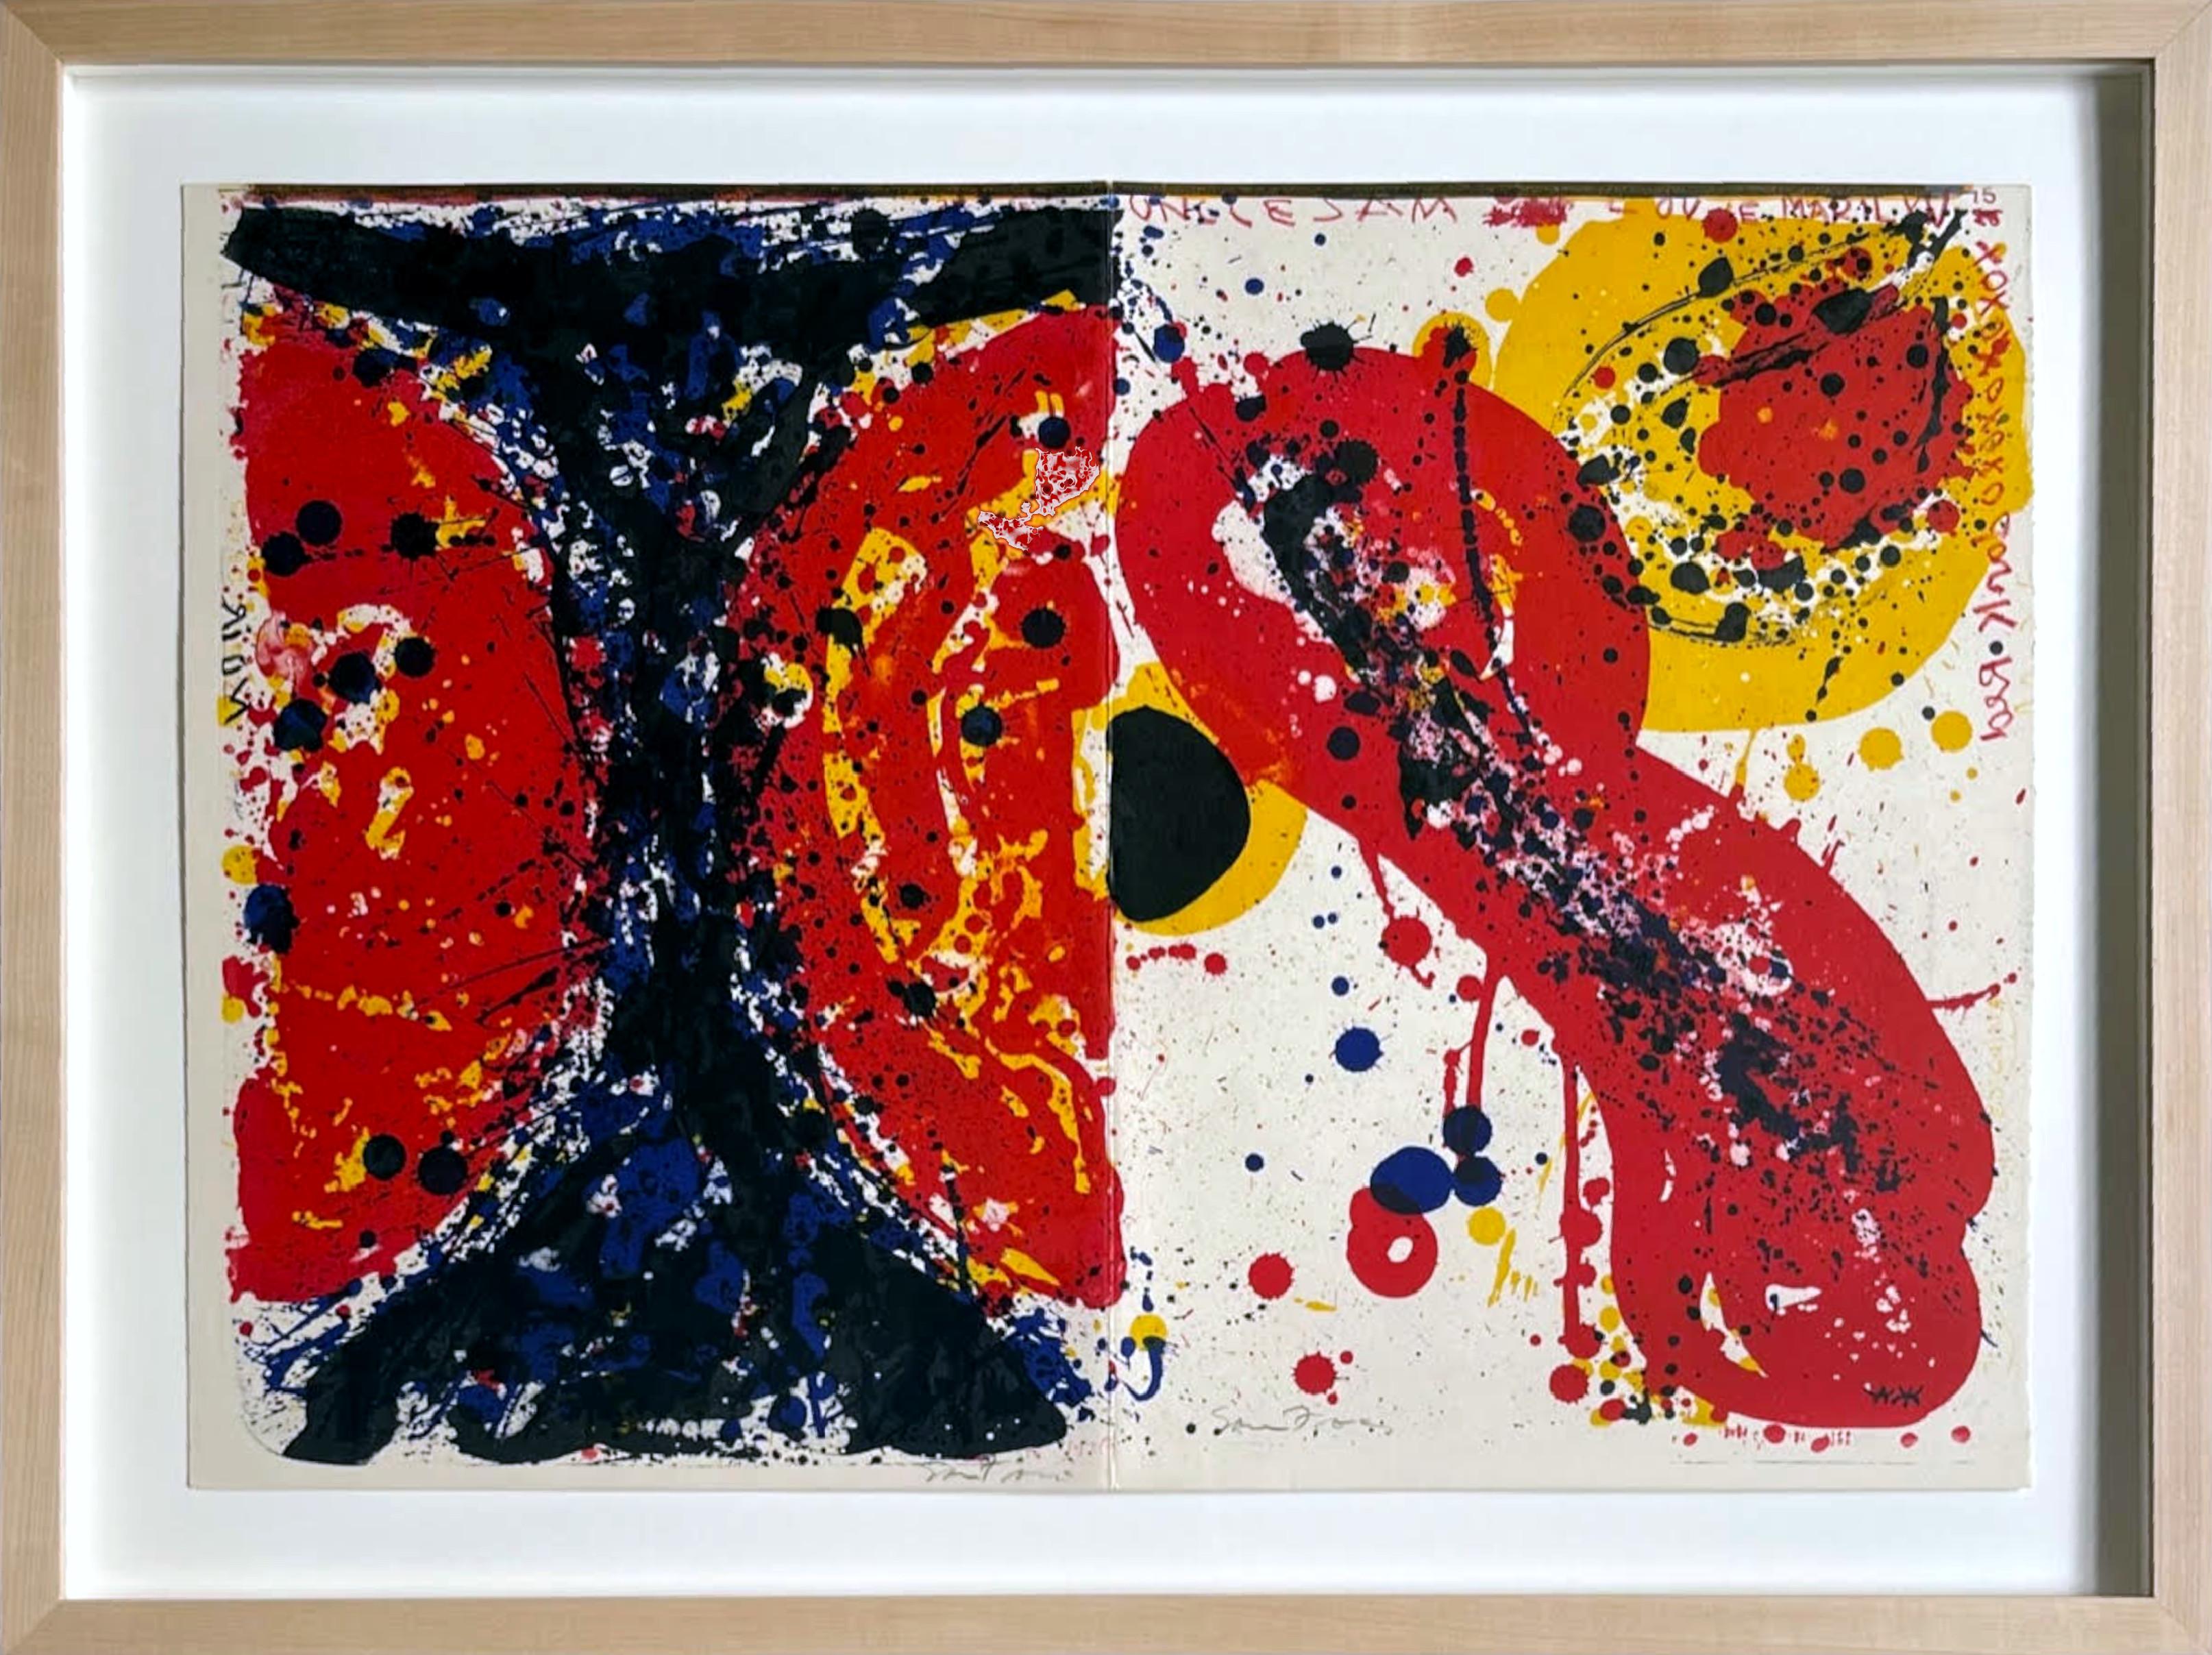 Two abstract lithographs from Deluxe signed edition 1 Cent Life Portfolio 85/100 - Print by Sam Francis